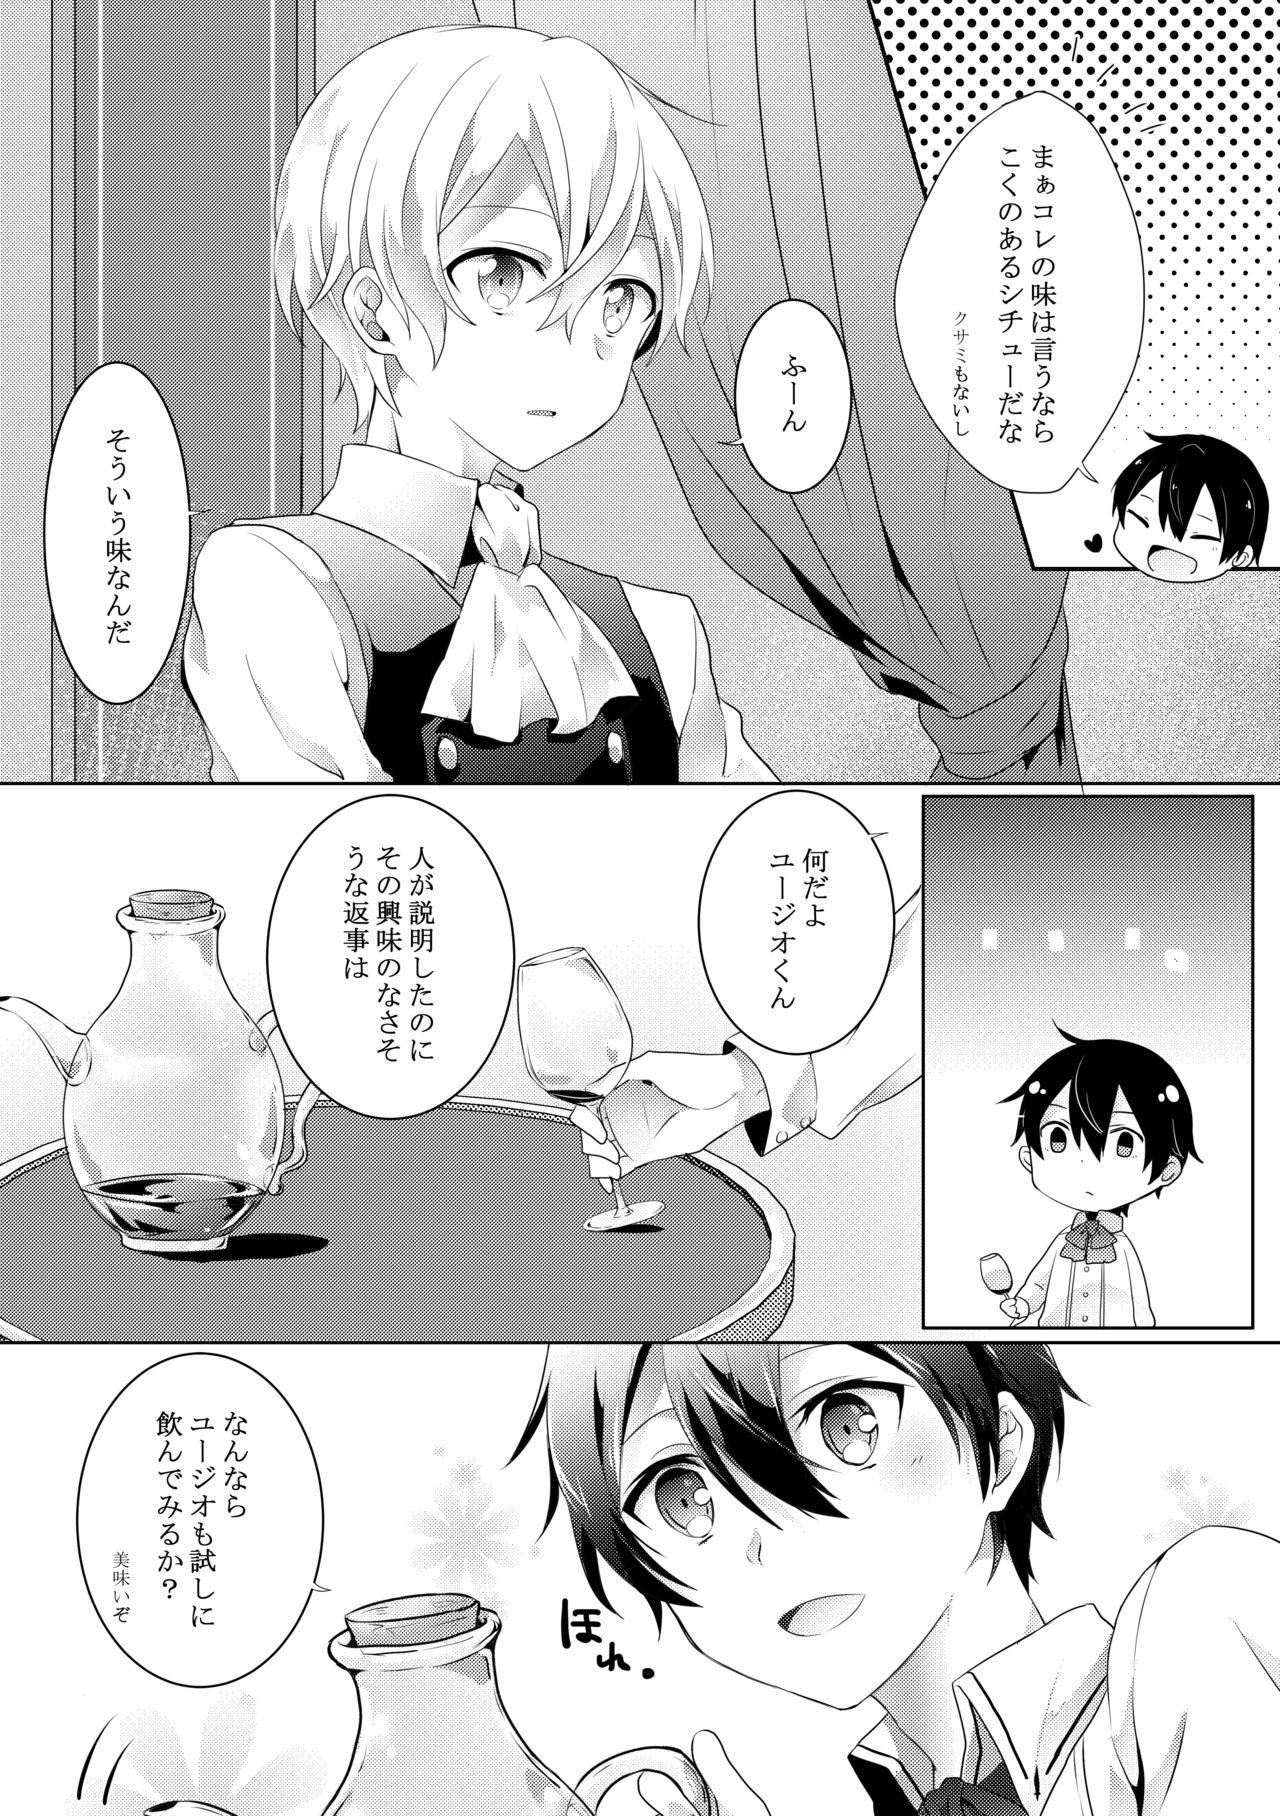 Gay Shorthair 君と僕のワルツ - Sword art online Workout - Page 5